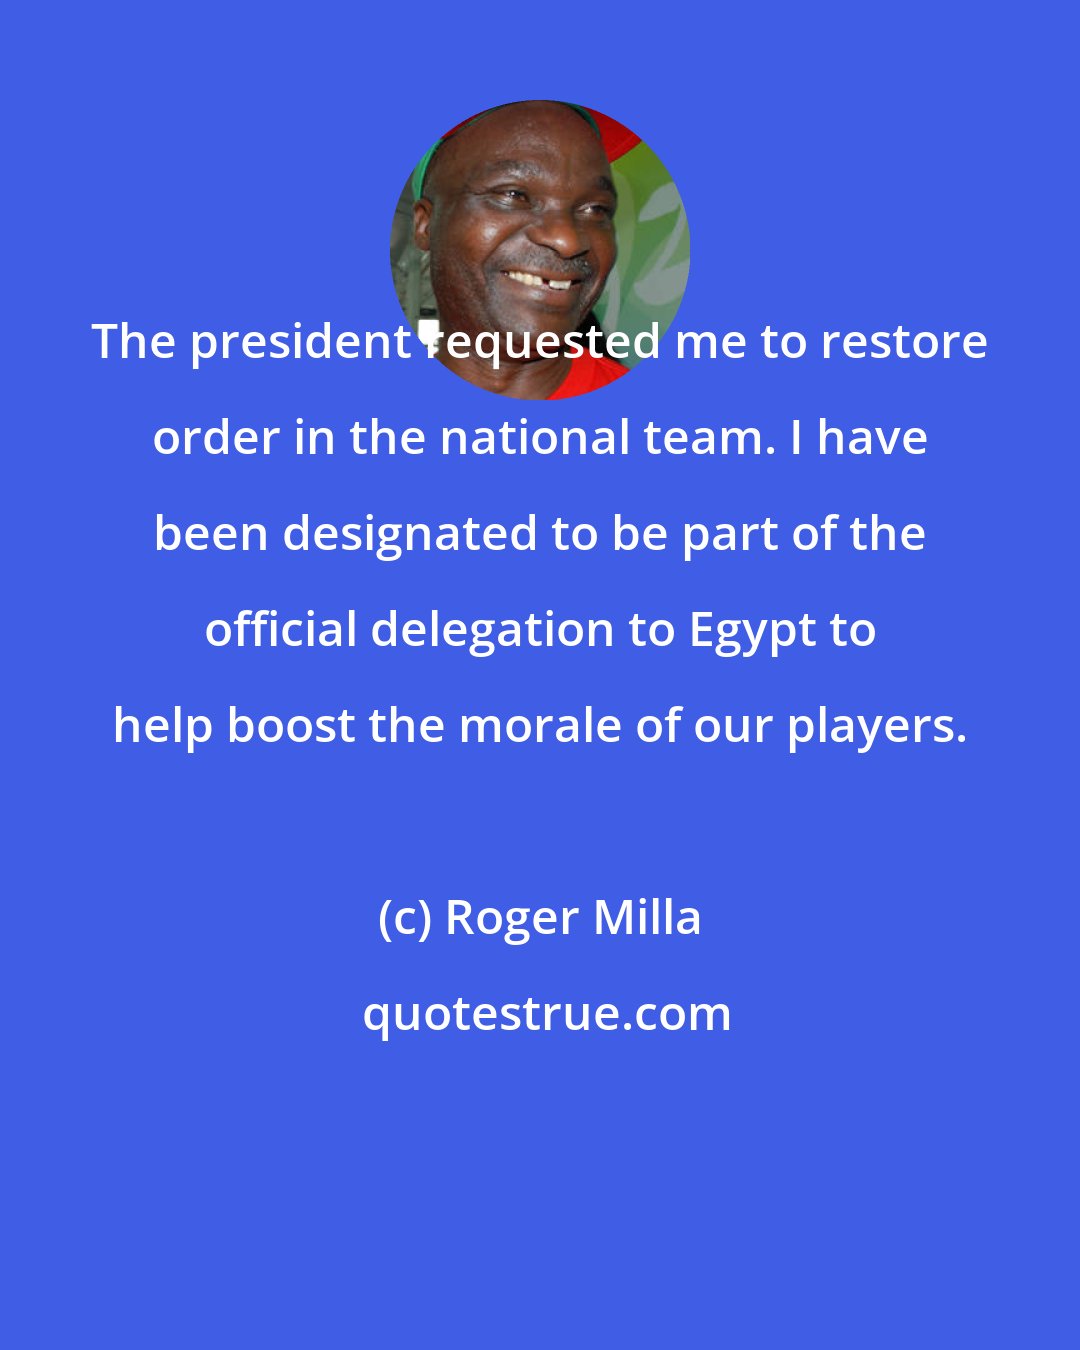 Roger Milla: The president requested me to restore order in the national team. I have been designated to be part of the official delegation to Egypt to help boost the morale of our players.